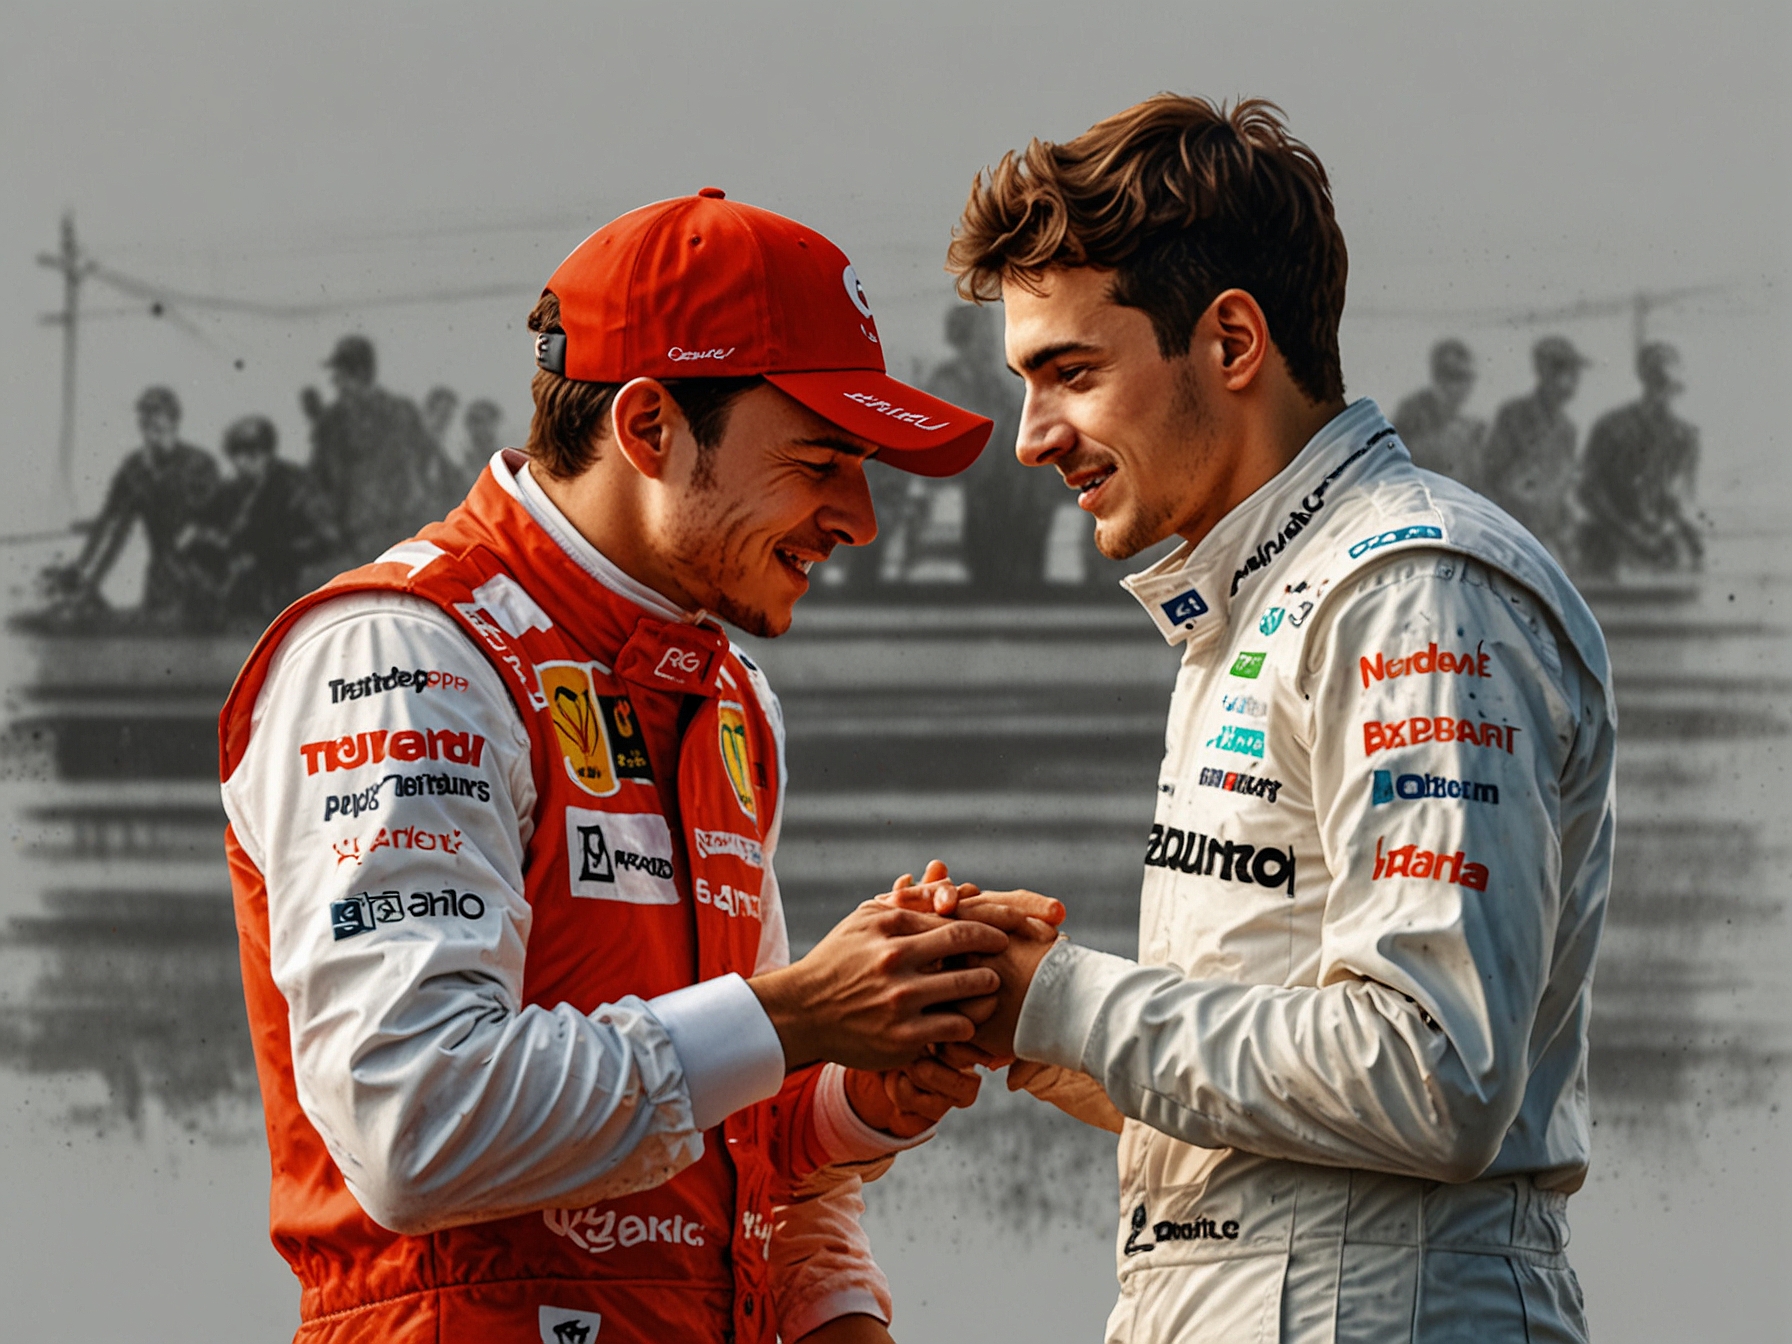 Leclerc and Norris address the collision in their post-race interviews, underscoring their commitment to sportsmanship and acknowledging the inherent risks and split-second decisions in motorsport.